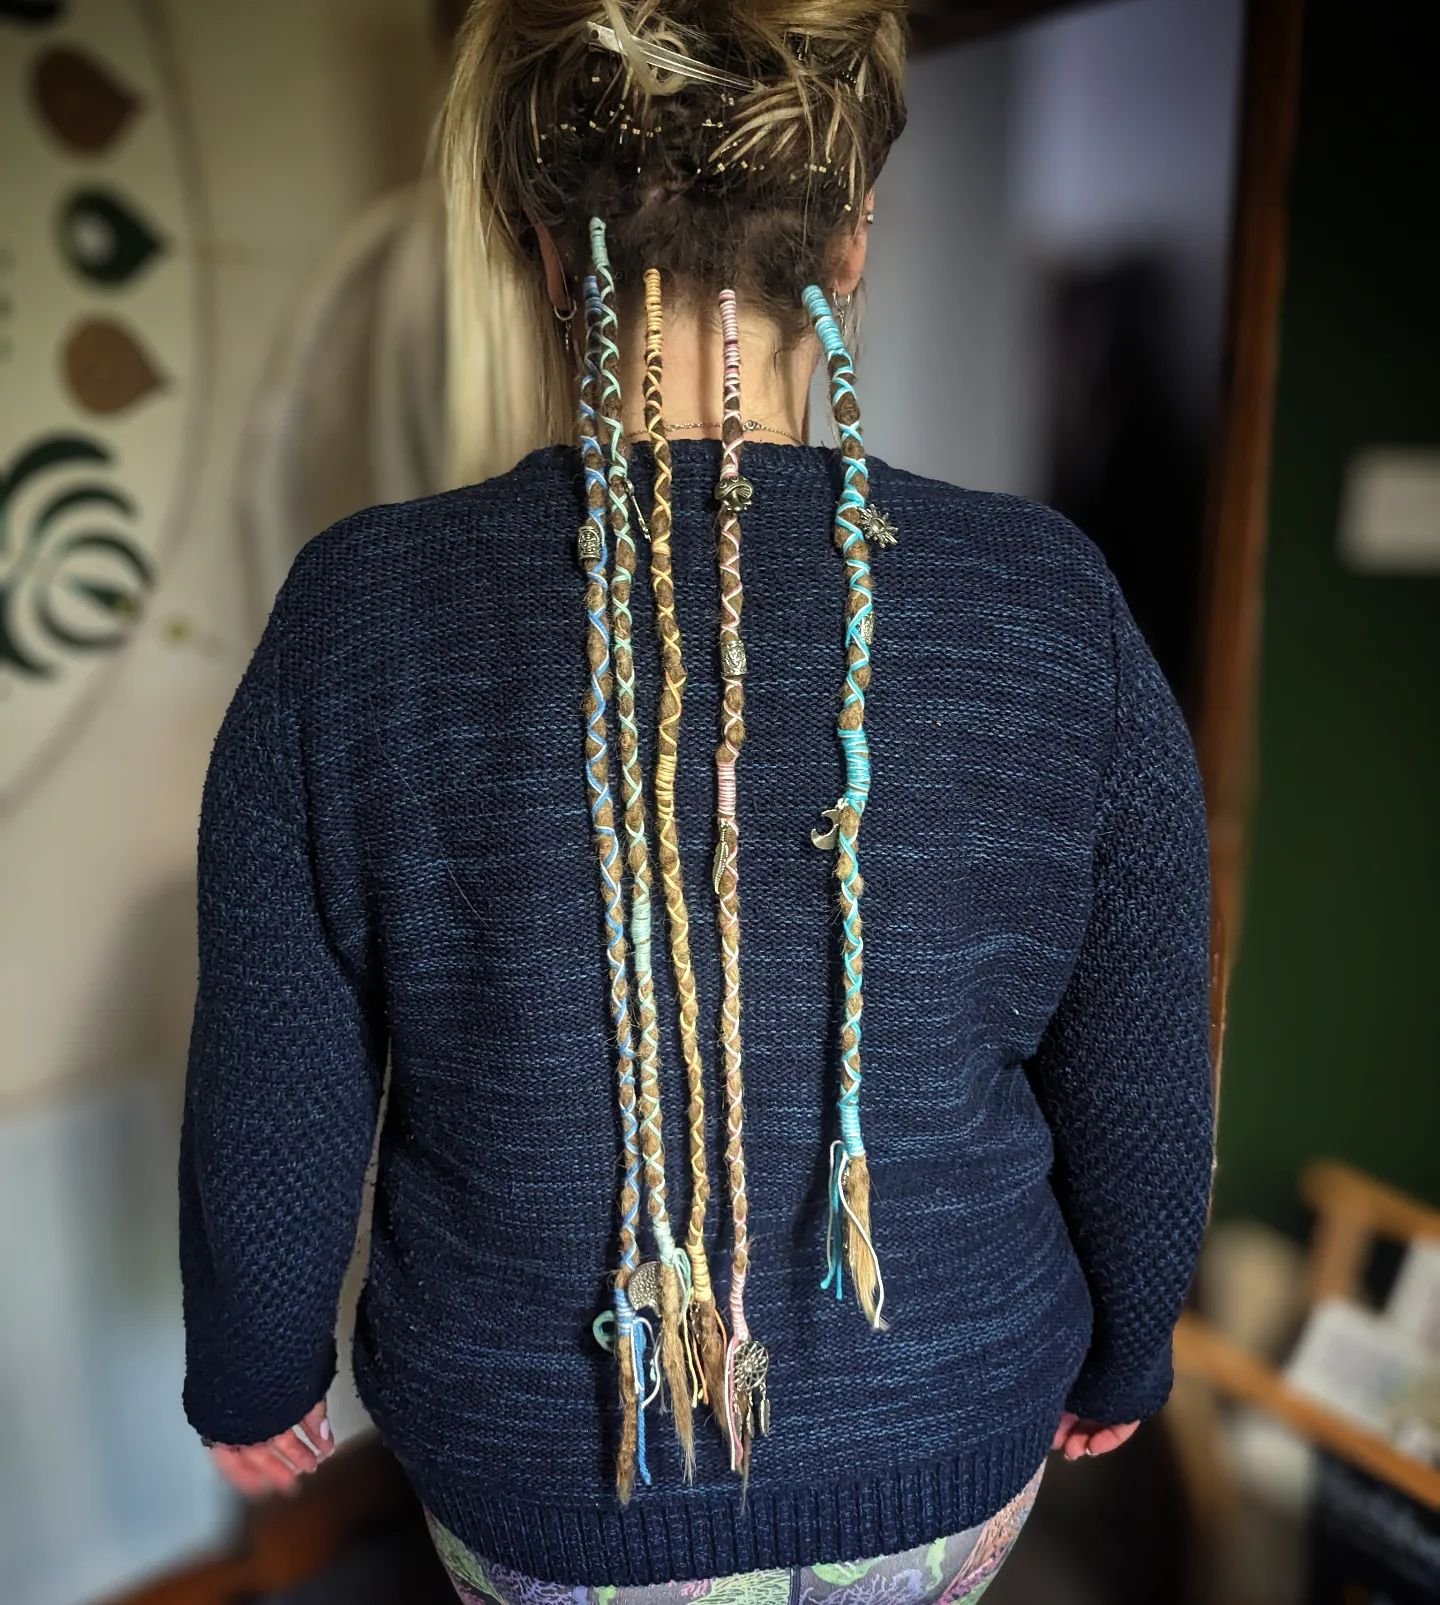 Yesterday Sarah-may popped by to get her dreads tidied and new wraps added for the summer. It's always lovely to catch up with this one!

She also bought some of my art prints and an original canvas painting I had done. I always get so excited when I